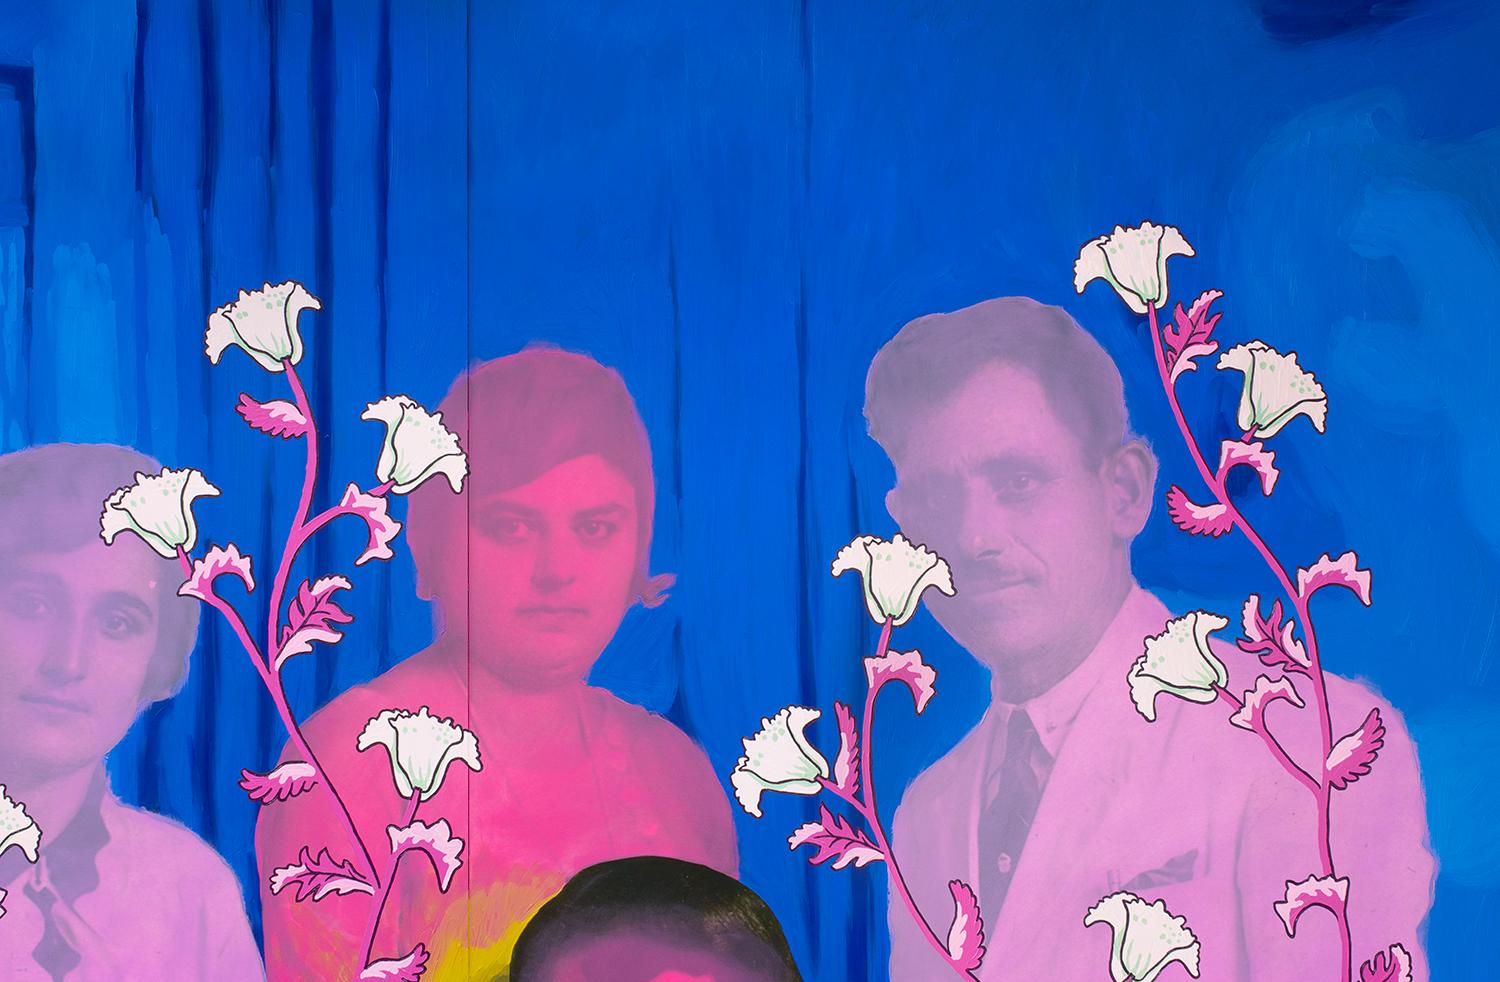 Untitled (Mother and Father with Two Daughters and White Flowers) - Painting by Daisy Patton